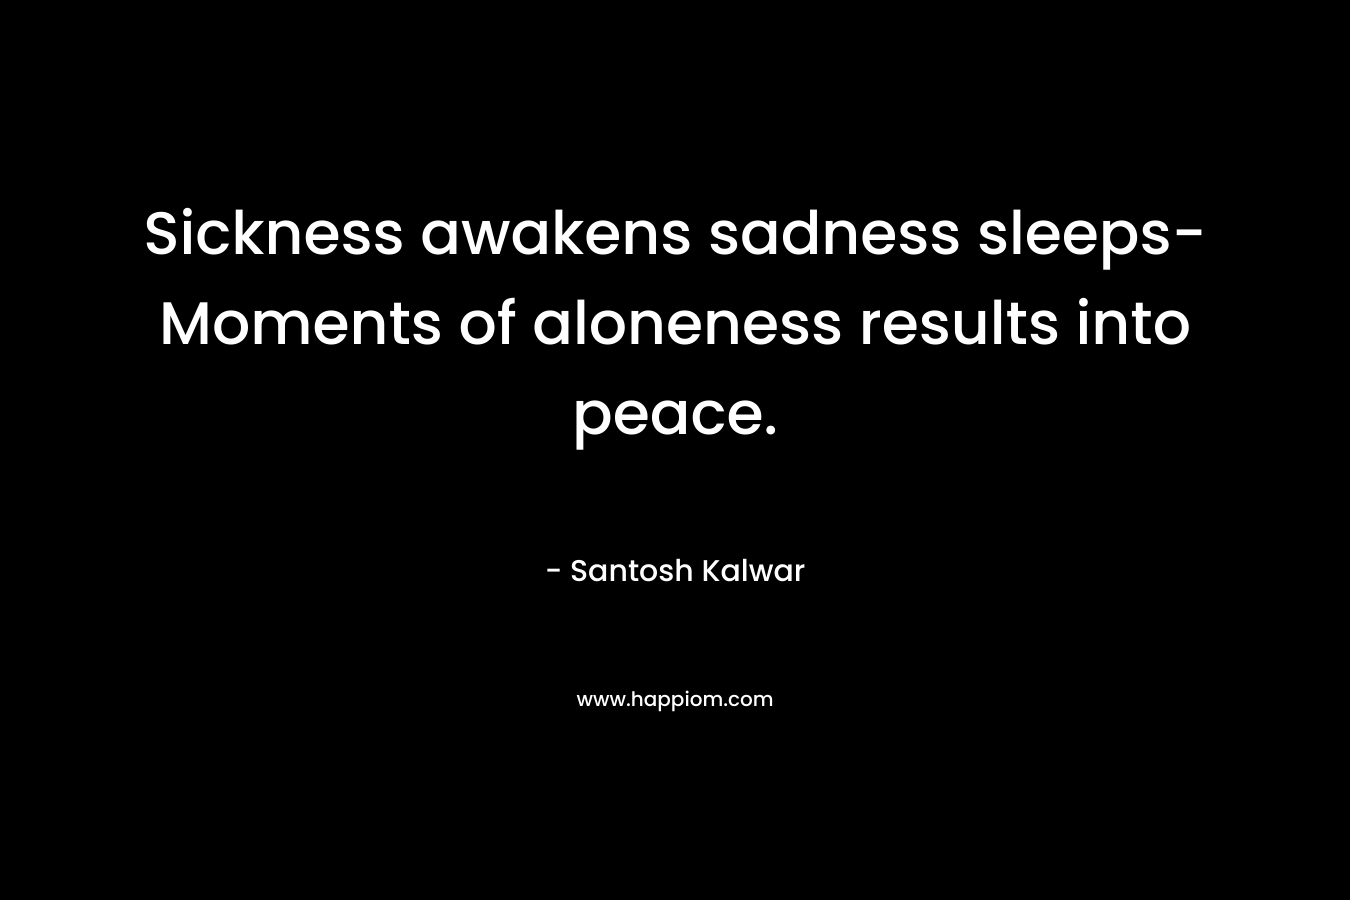 Sickness awakens sadness sleeps- Moments of aloneness results into peace.